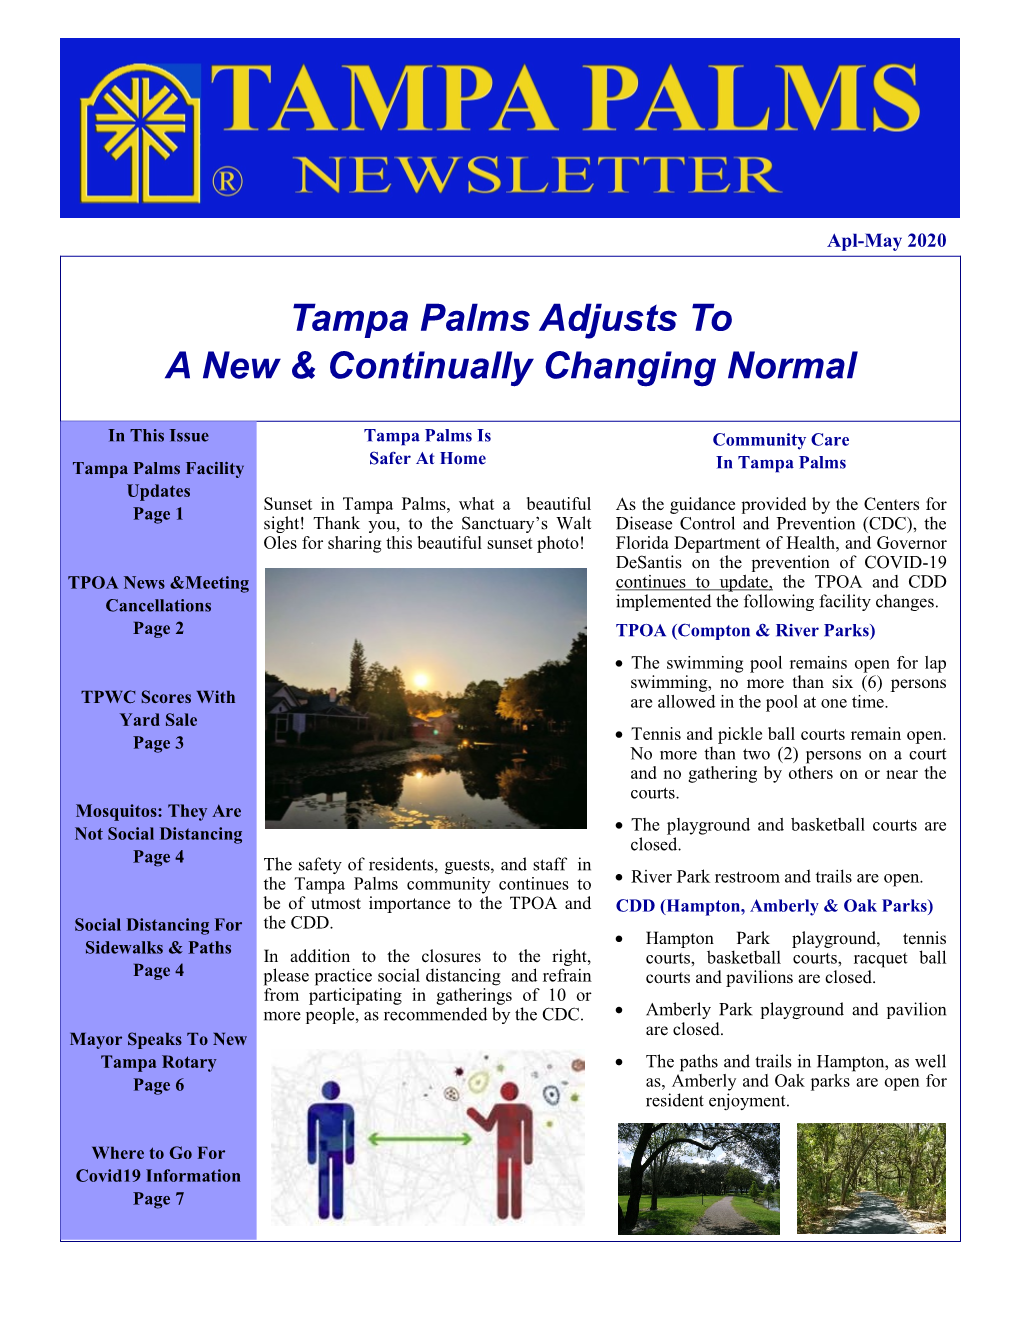 Tampa Palms Adjusts to a New & Continually Changing Normal